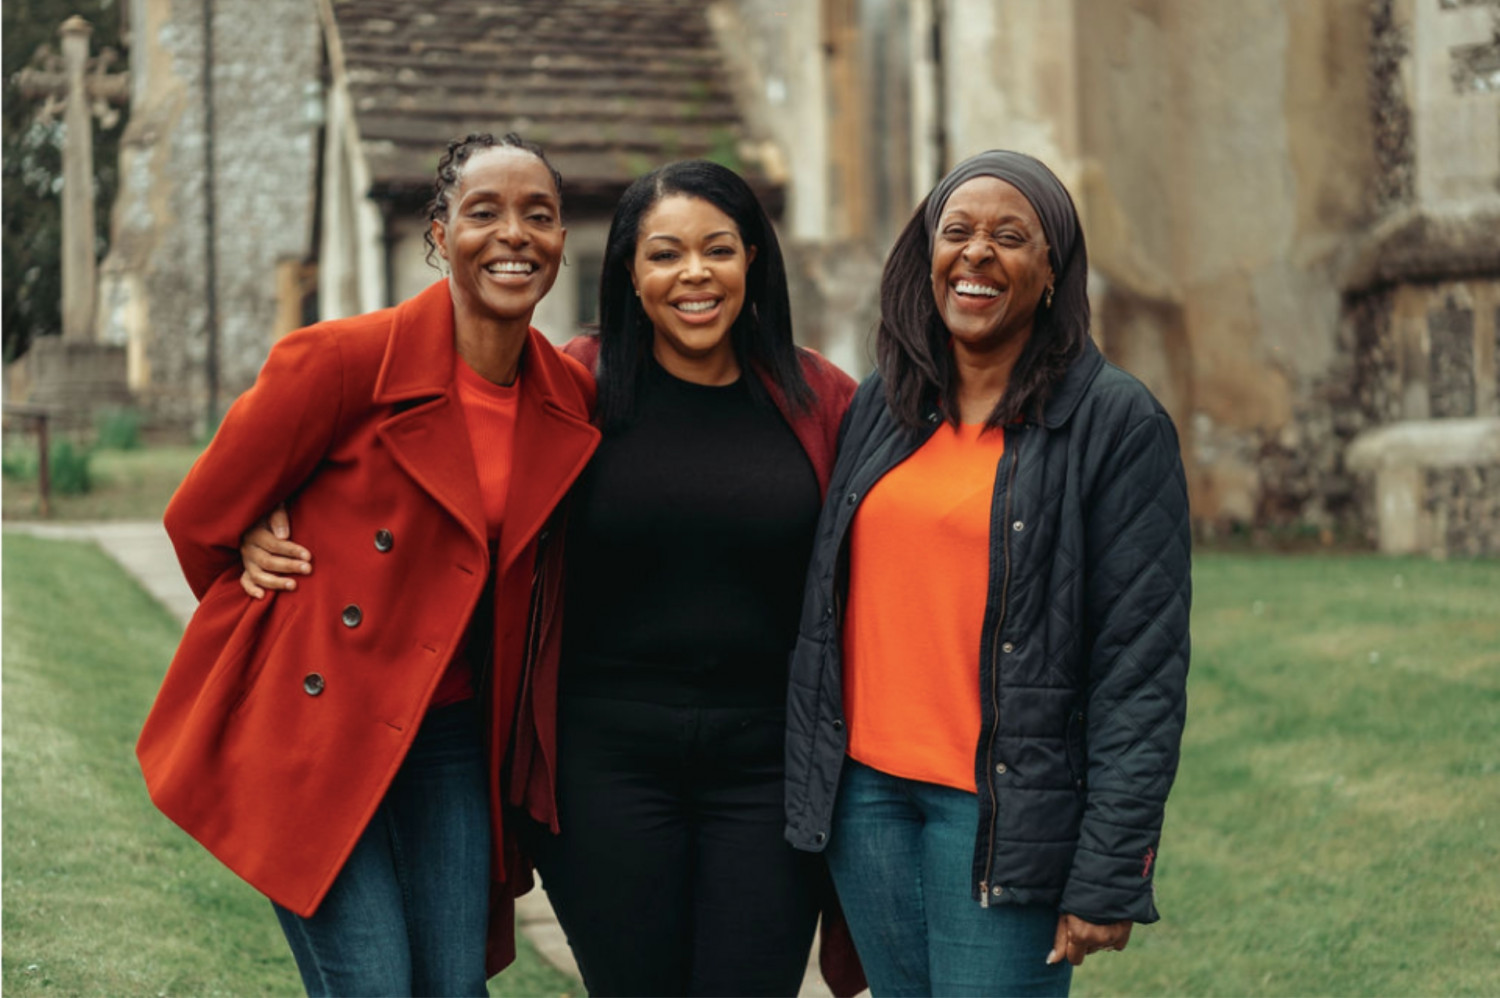 Three women stood in a churchyard smiling at the camera with arms around one another.